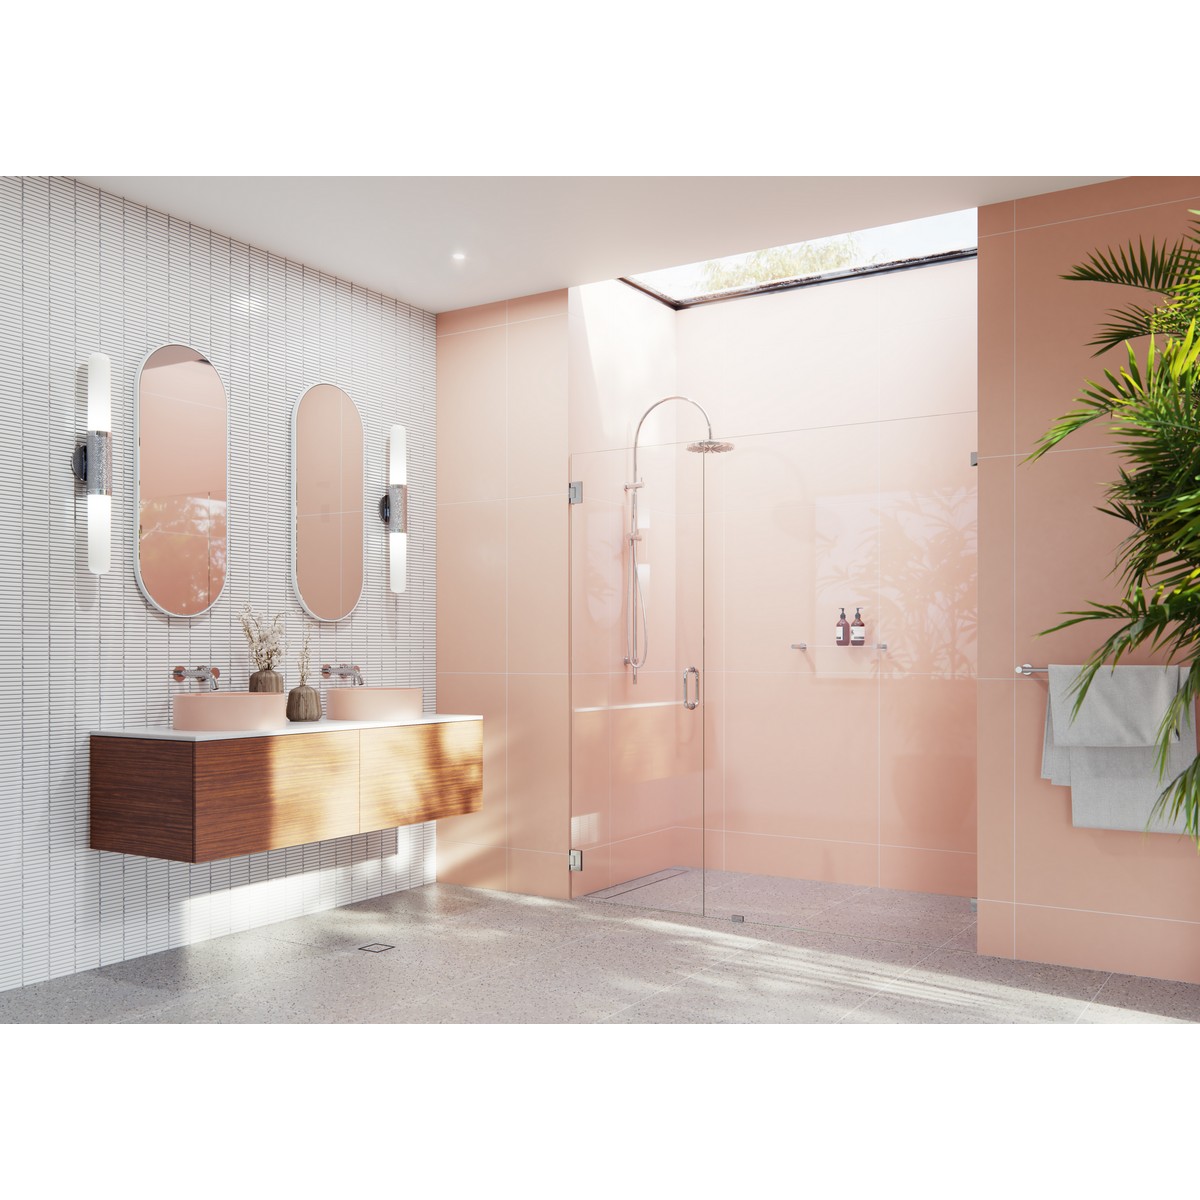 GLASS WAREHOUSE GW-WH-72 ILLUME 72 W X 78 H WALL HINGED FULLY FRAMELESS GLASS SHOWER ENCLOSURE